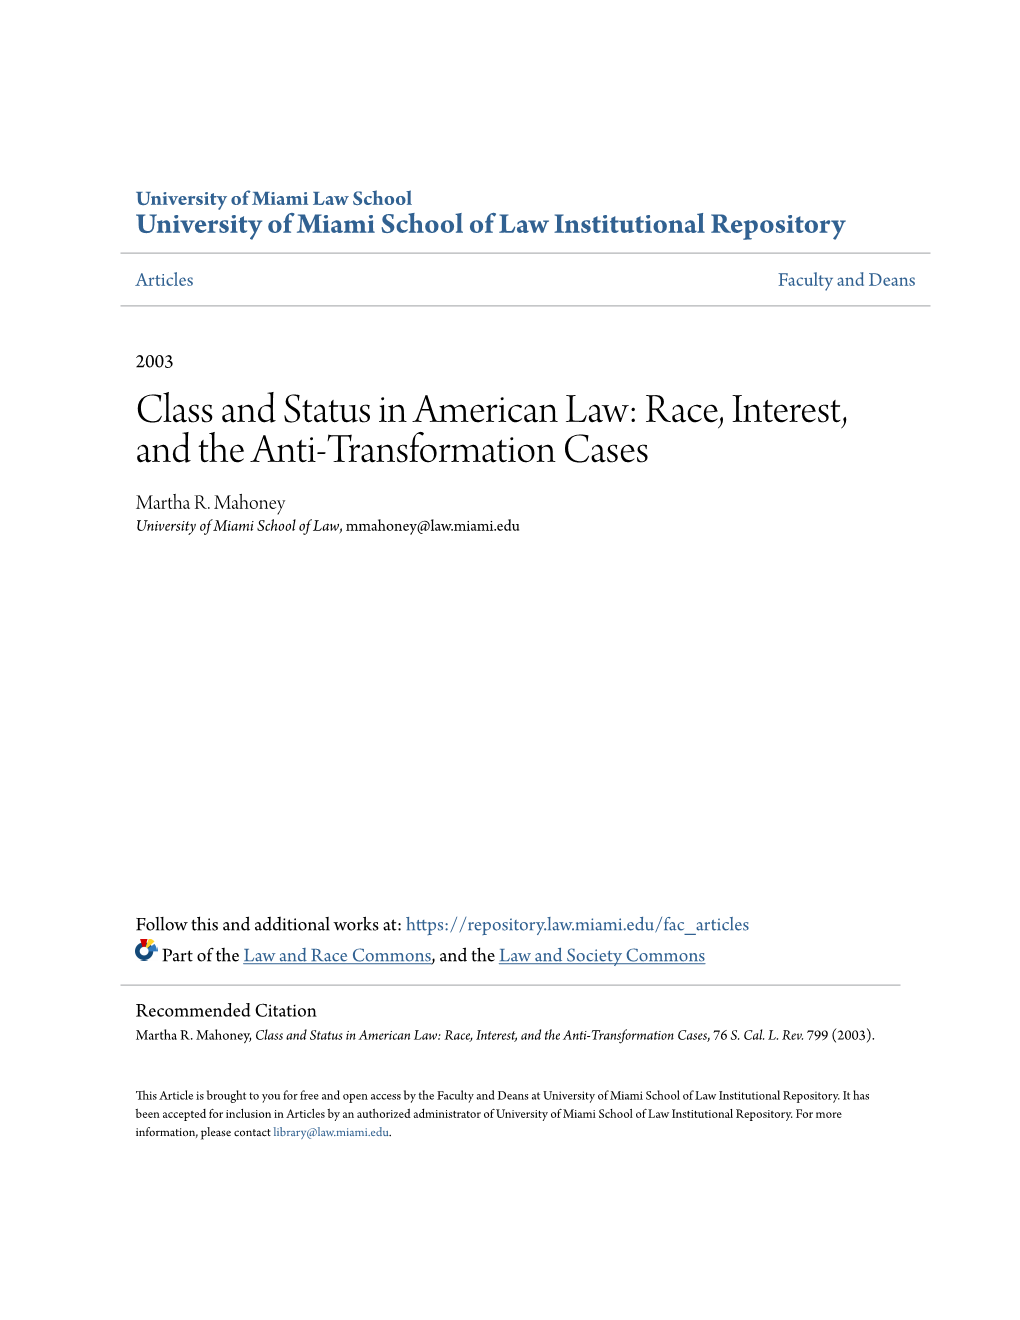 Race, Interest, and the Anti-Transformation Cases Martha R